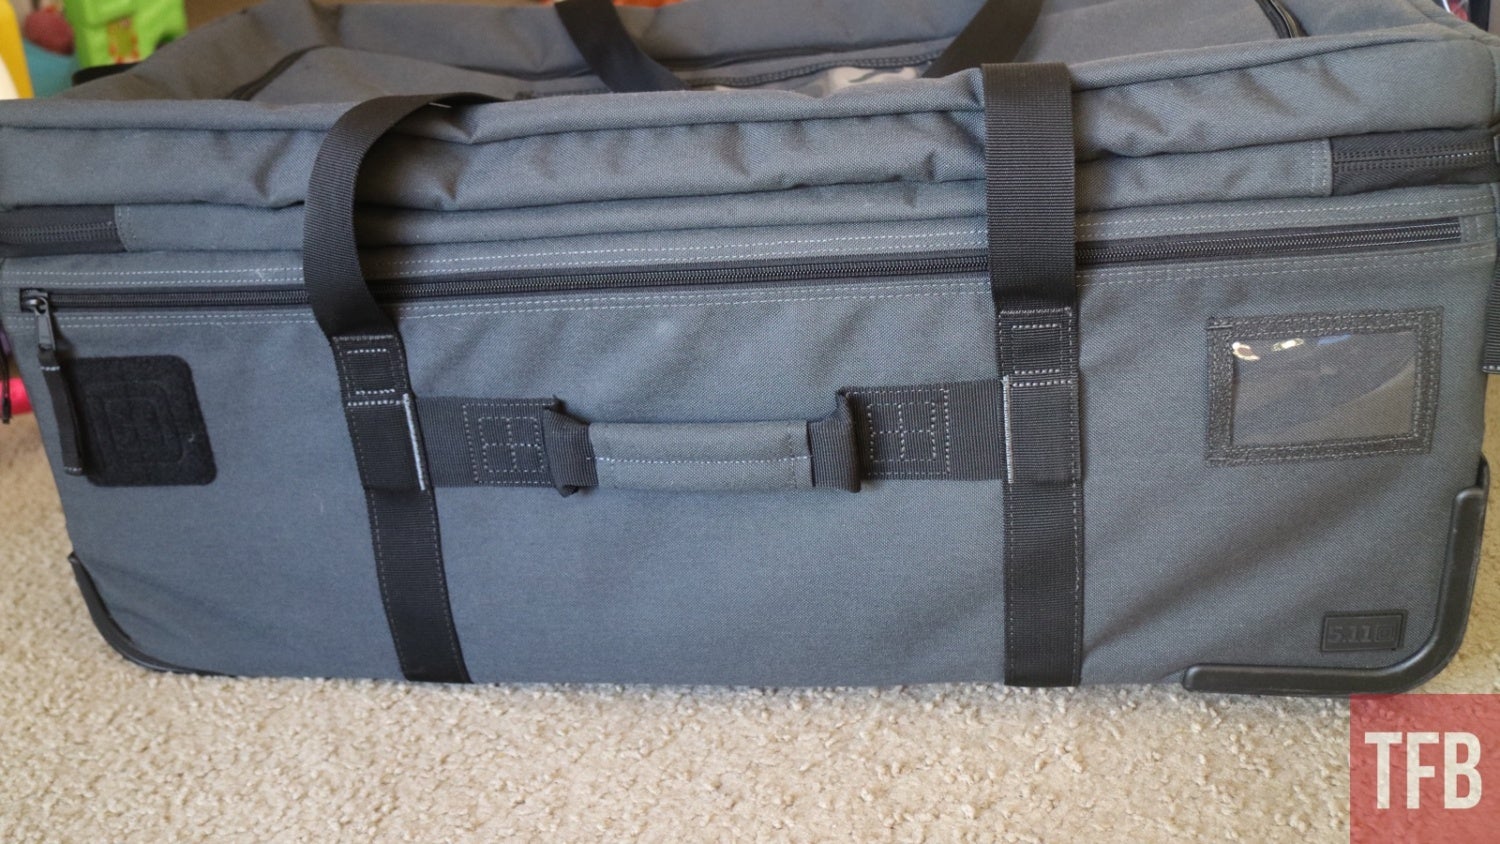 TFB Review: Traveling With the 5.11 Mission Ready 3.0